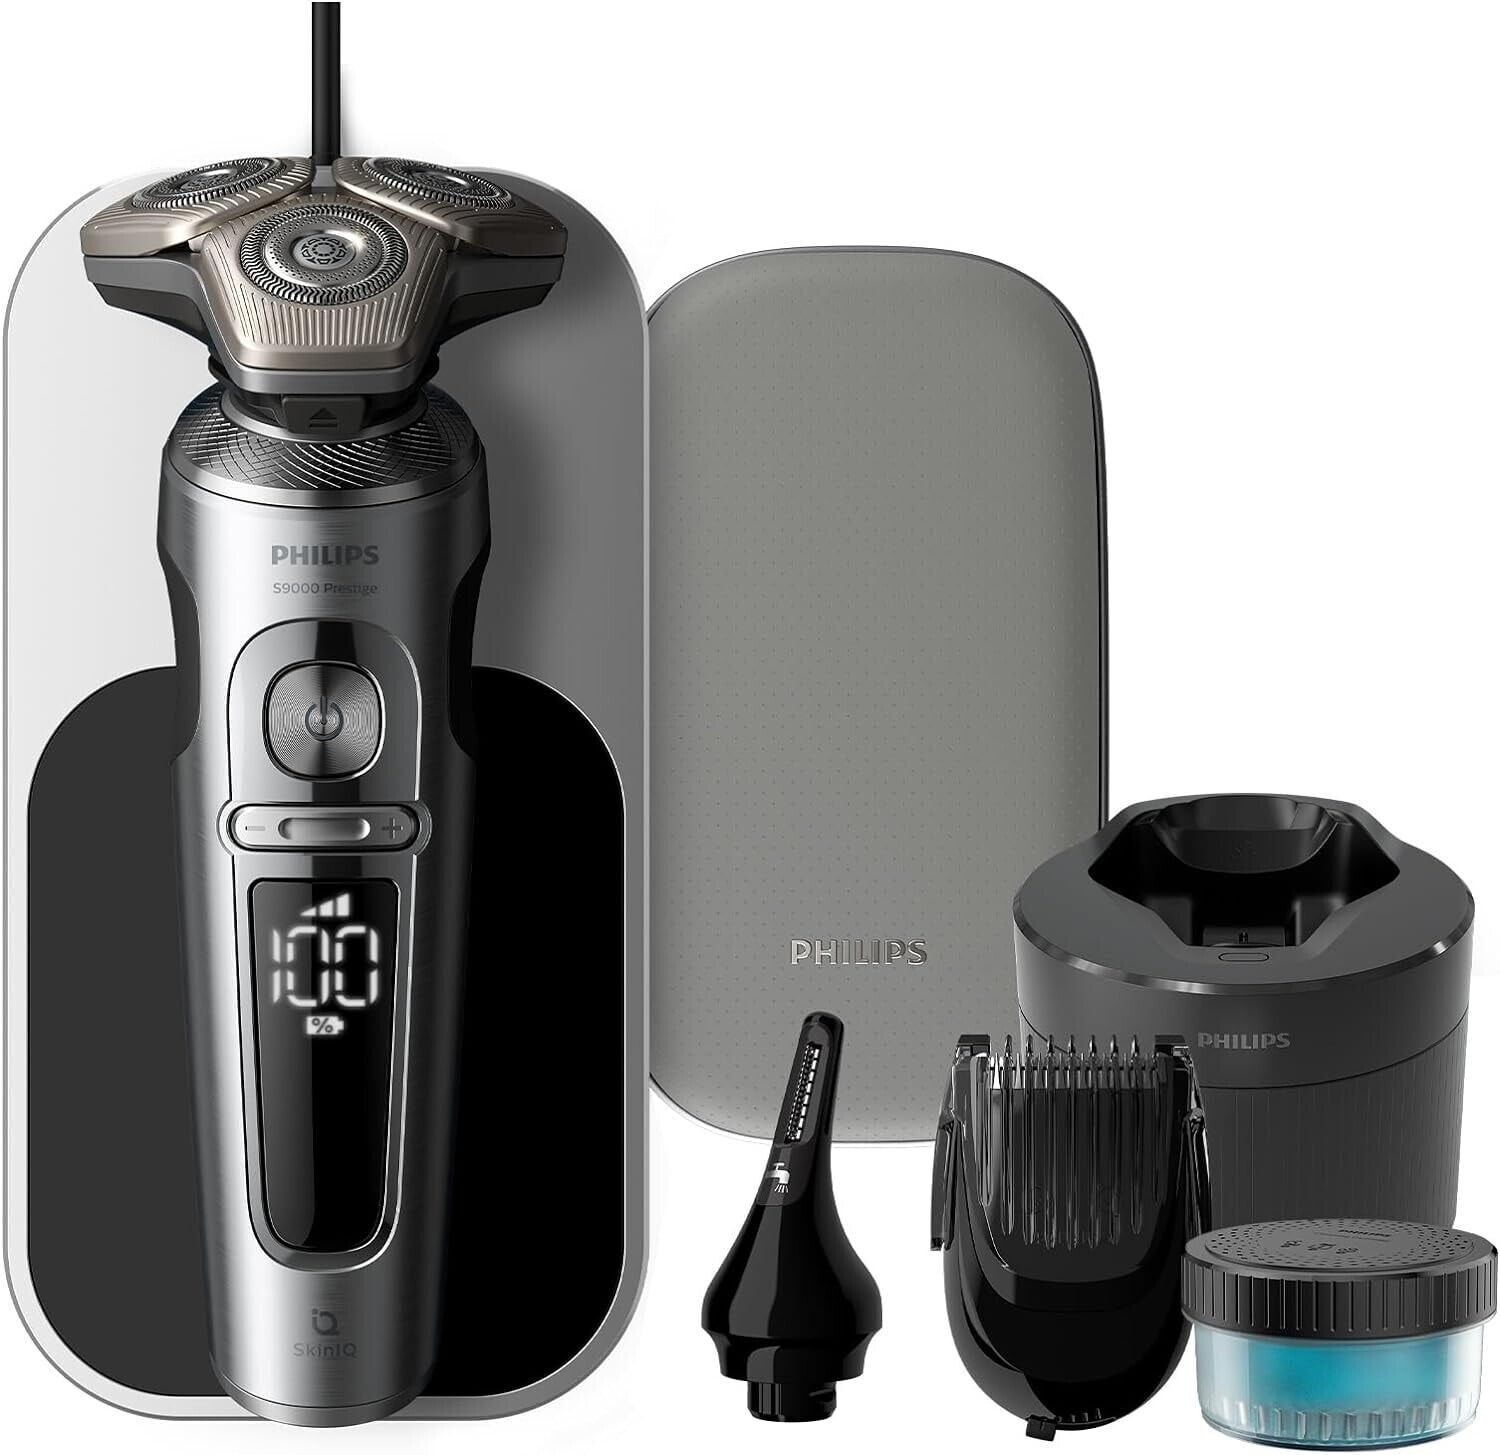 Philips Razor S9000 Prestige Wet and Dry Razor for Men with SkinIQ Technology, Qi Charging Pad, Cleaning Station, Beard Styler & Nose Hair Trimmer (Model SP9871/22)